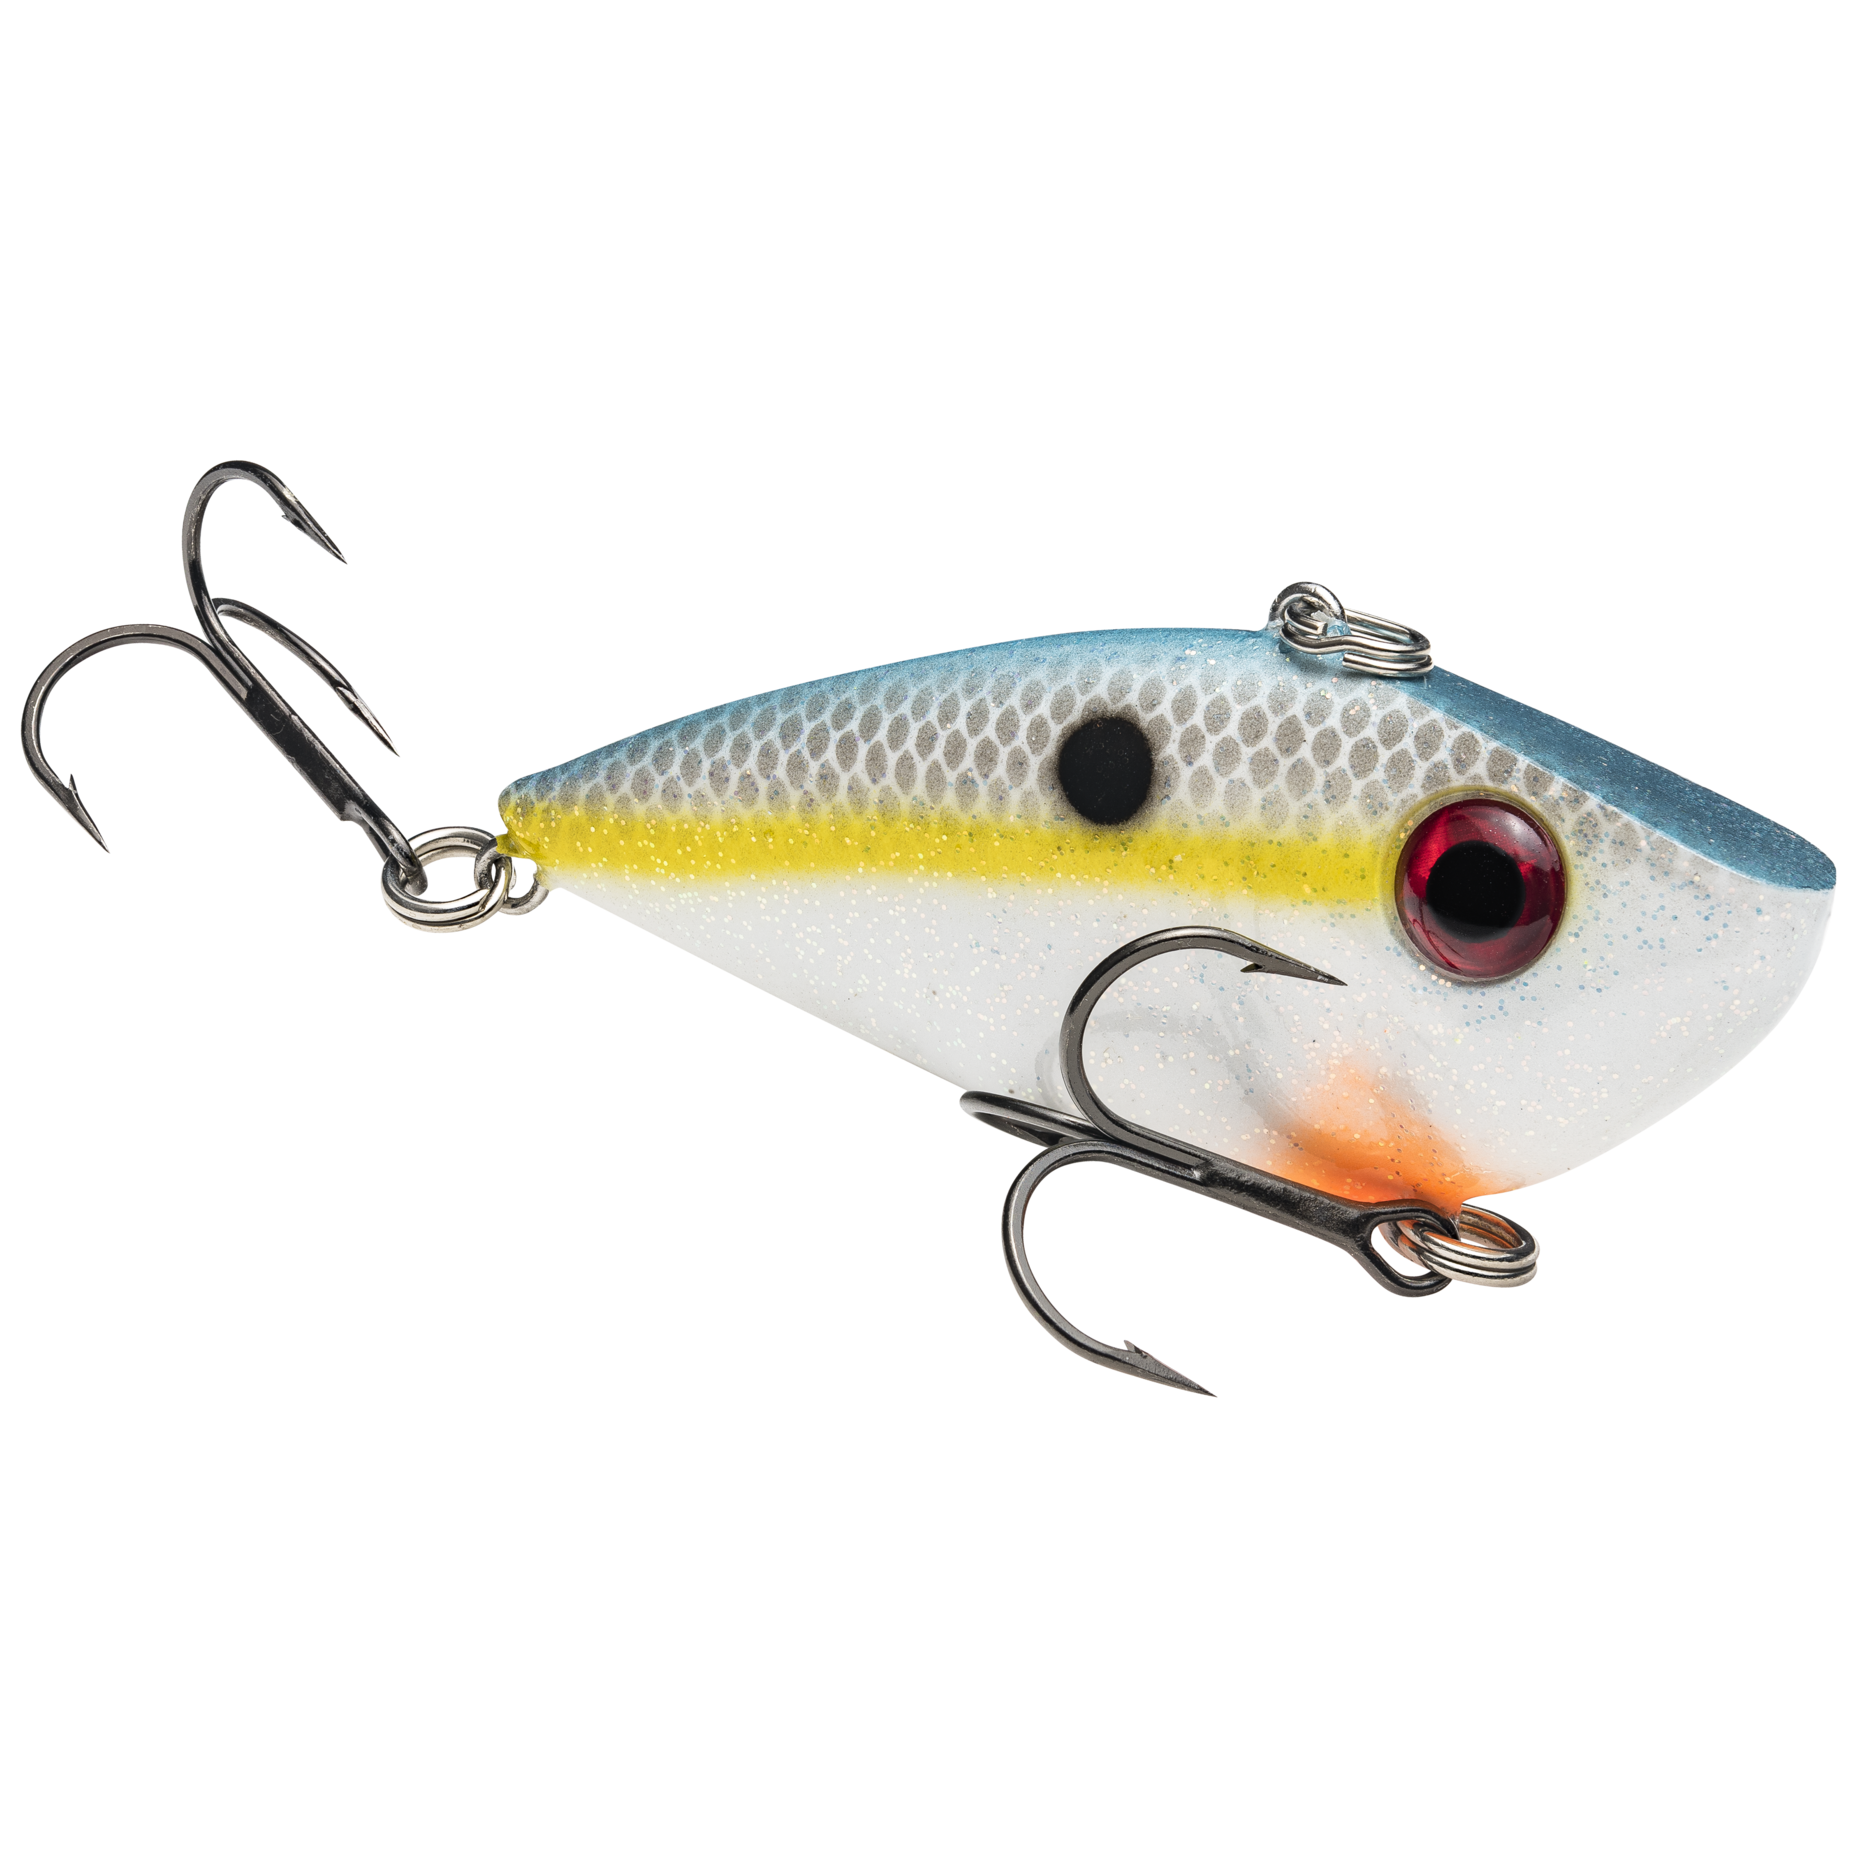 Strike King Red Eyed Shad,Gizzard Shad